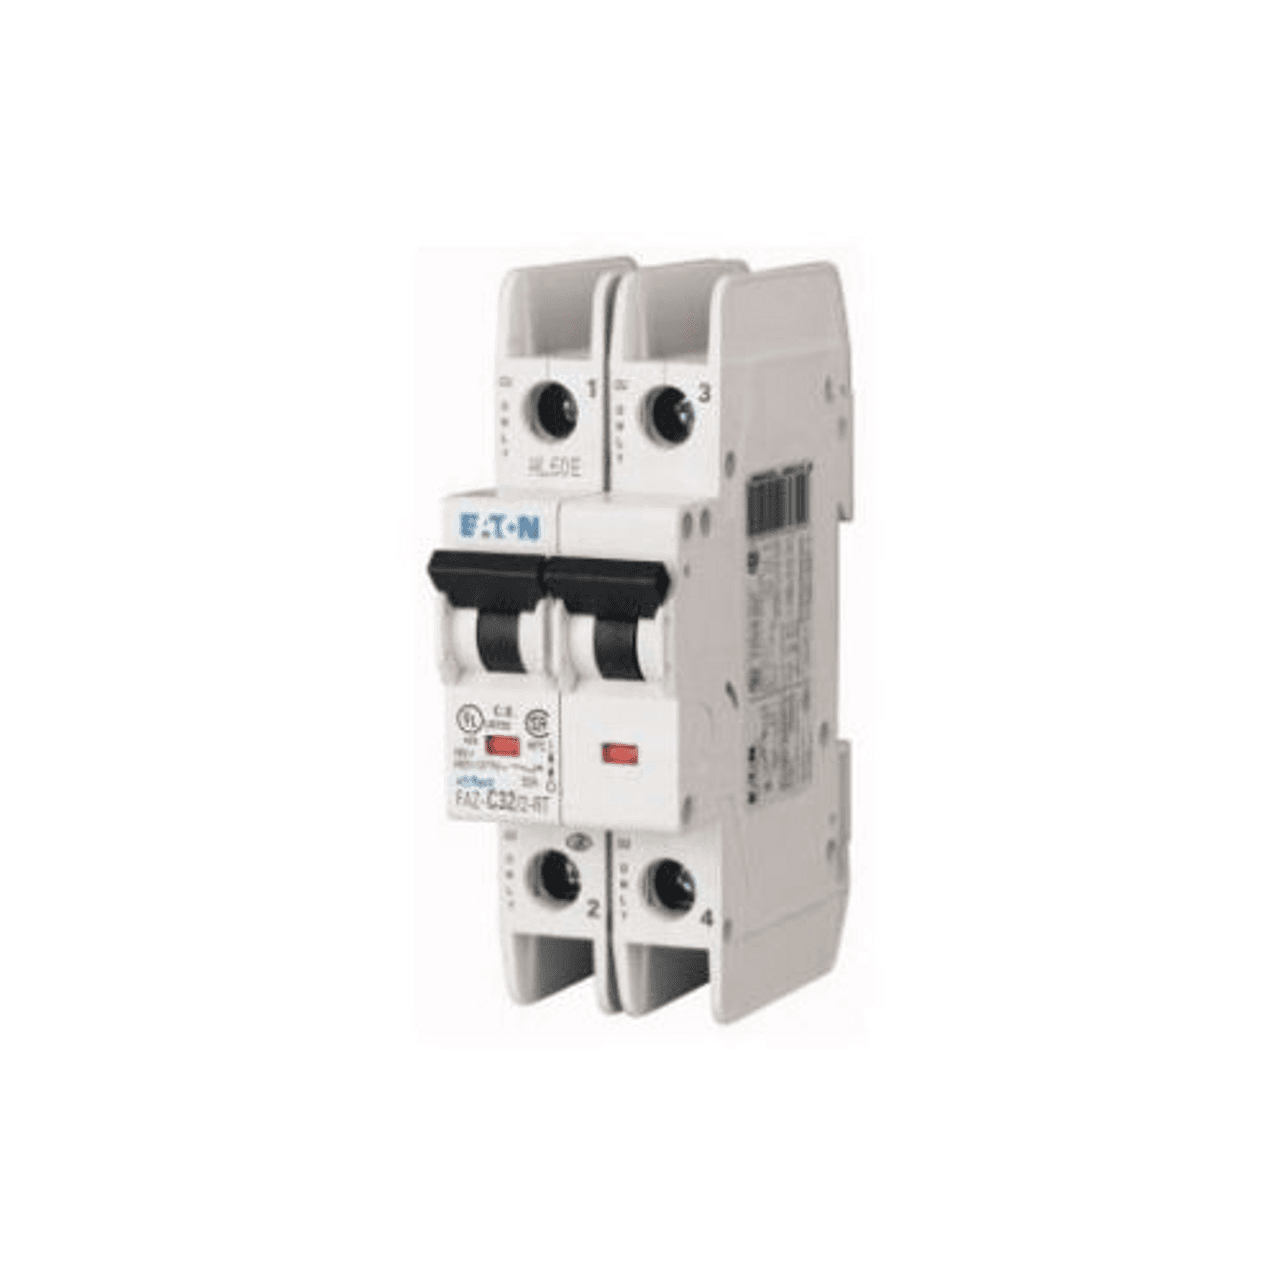 Eaton FAZ-C20/2-RT 277/480 VAC 50/60 Hz, 20 A, 2-Pole, 10/14 kA, 5 to 10 x Rated Current, Ring Tongue Terminal, DIN Rail Mount, Standard Packaging, C-Curve, Current Limiting, Thermal Magnetic